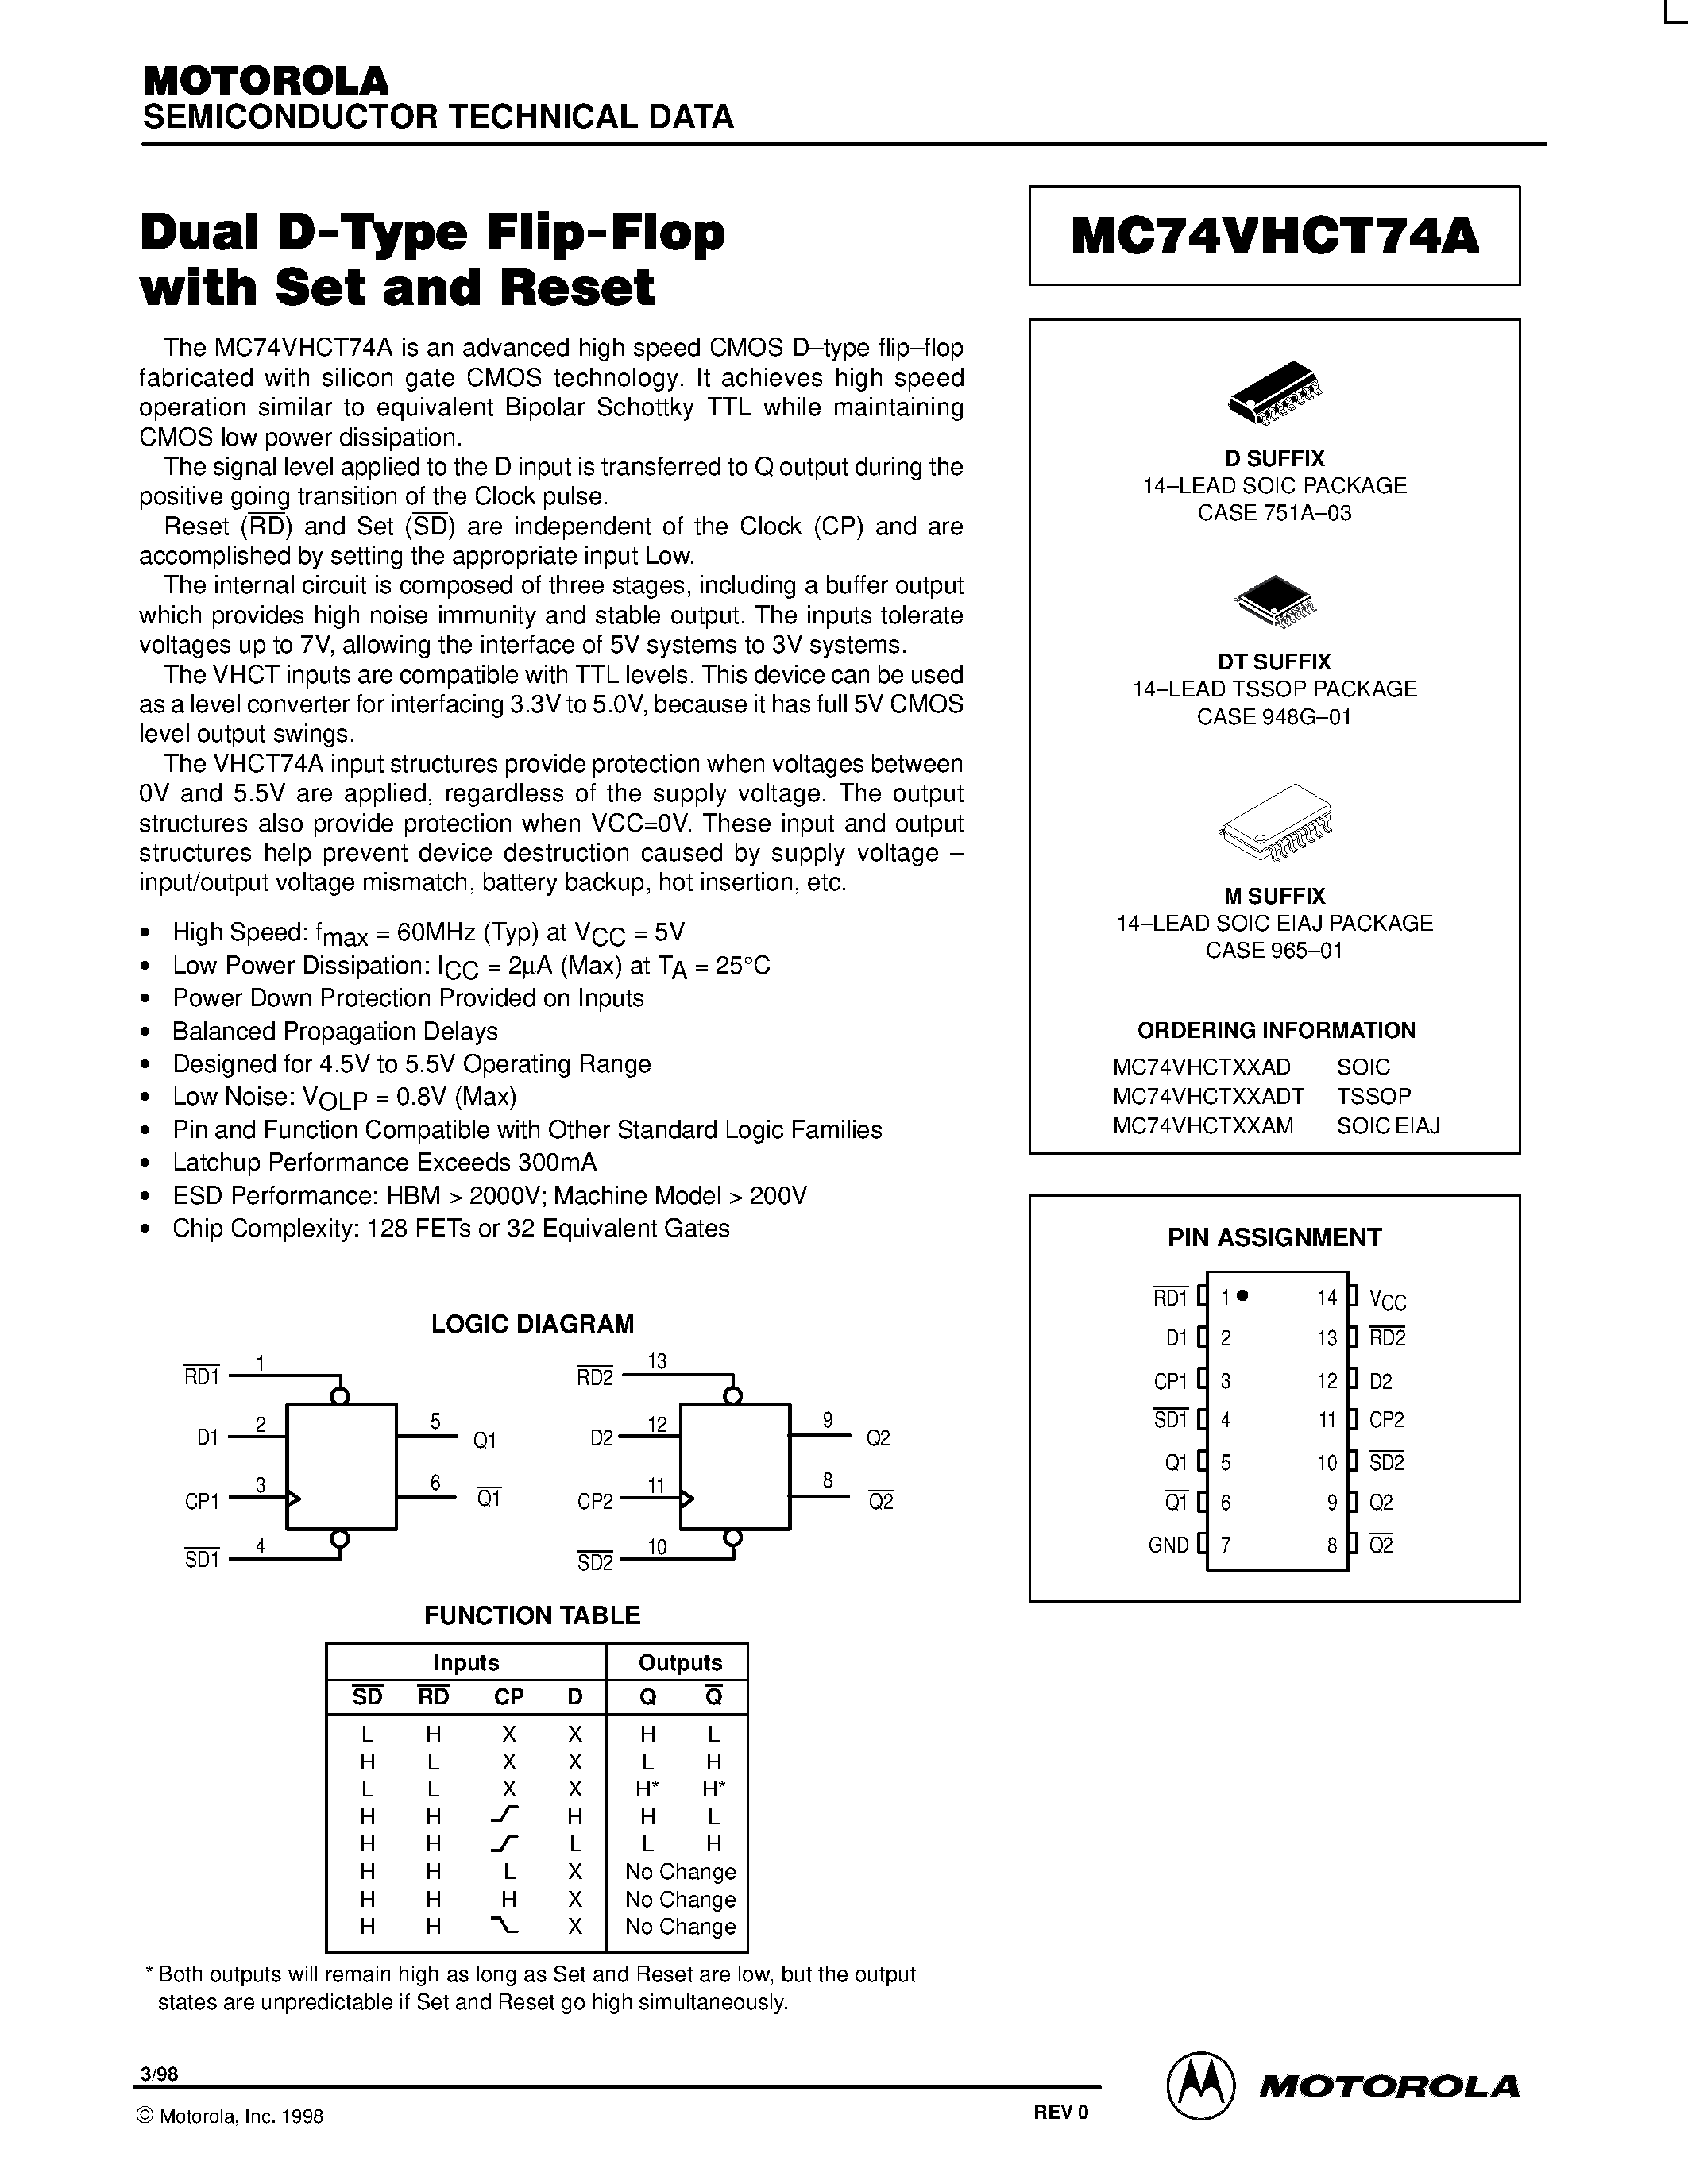 Datasheet MC74VHCT74A - Dual D-Type Flip-Flop with Set and Reset page 1